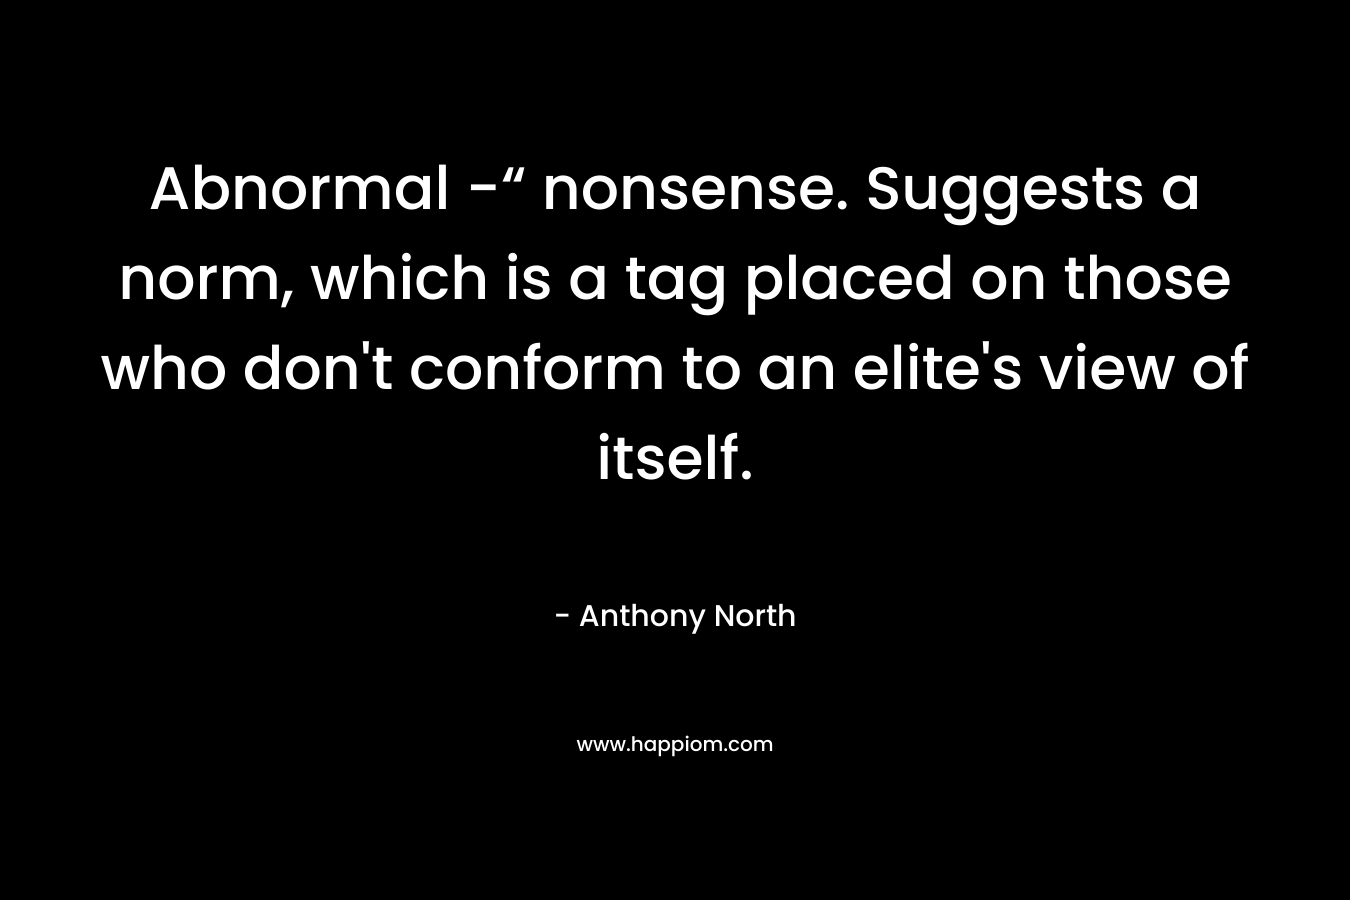 Abnormal -“ nonsense. Suggests a norm, which is a tag placed on those who don’t conform to an elite’s view of itself. – Anthony   North